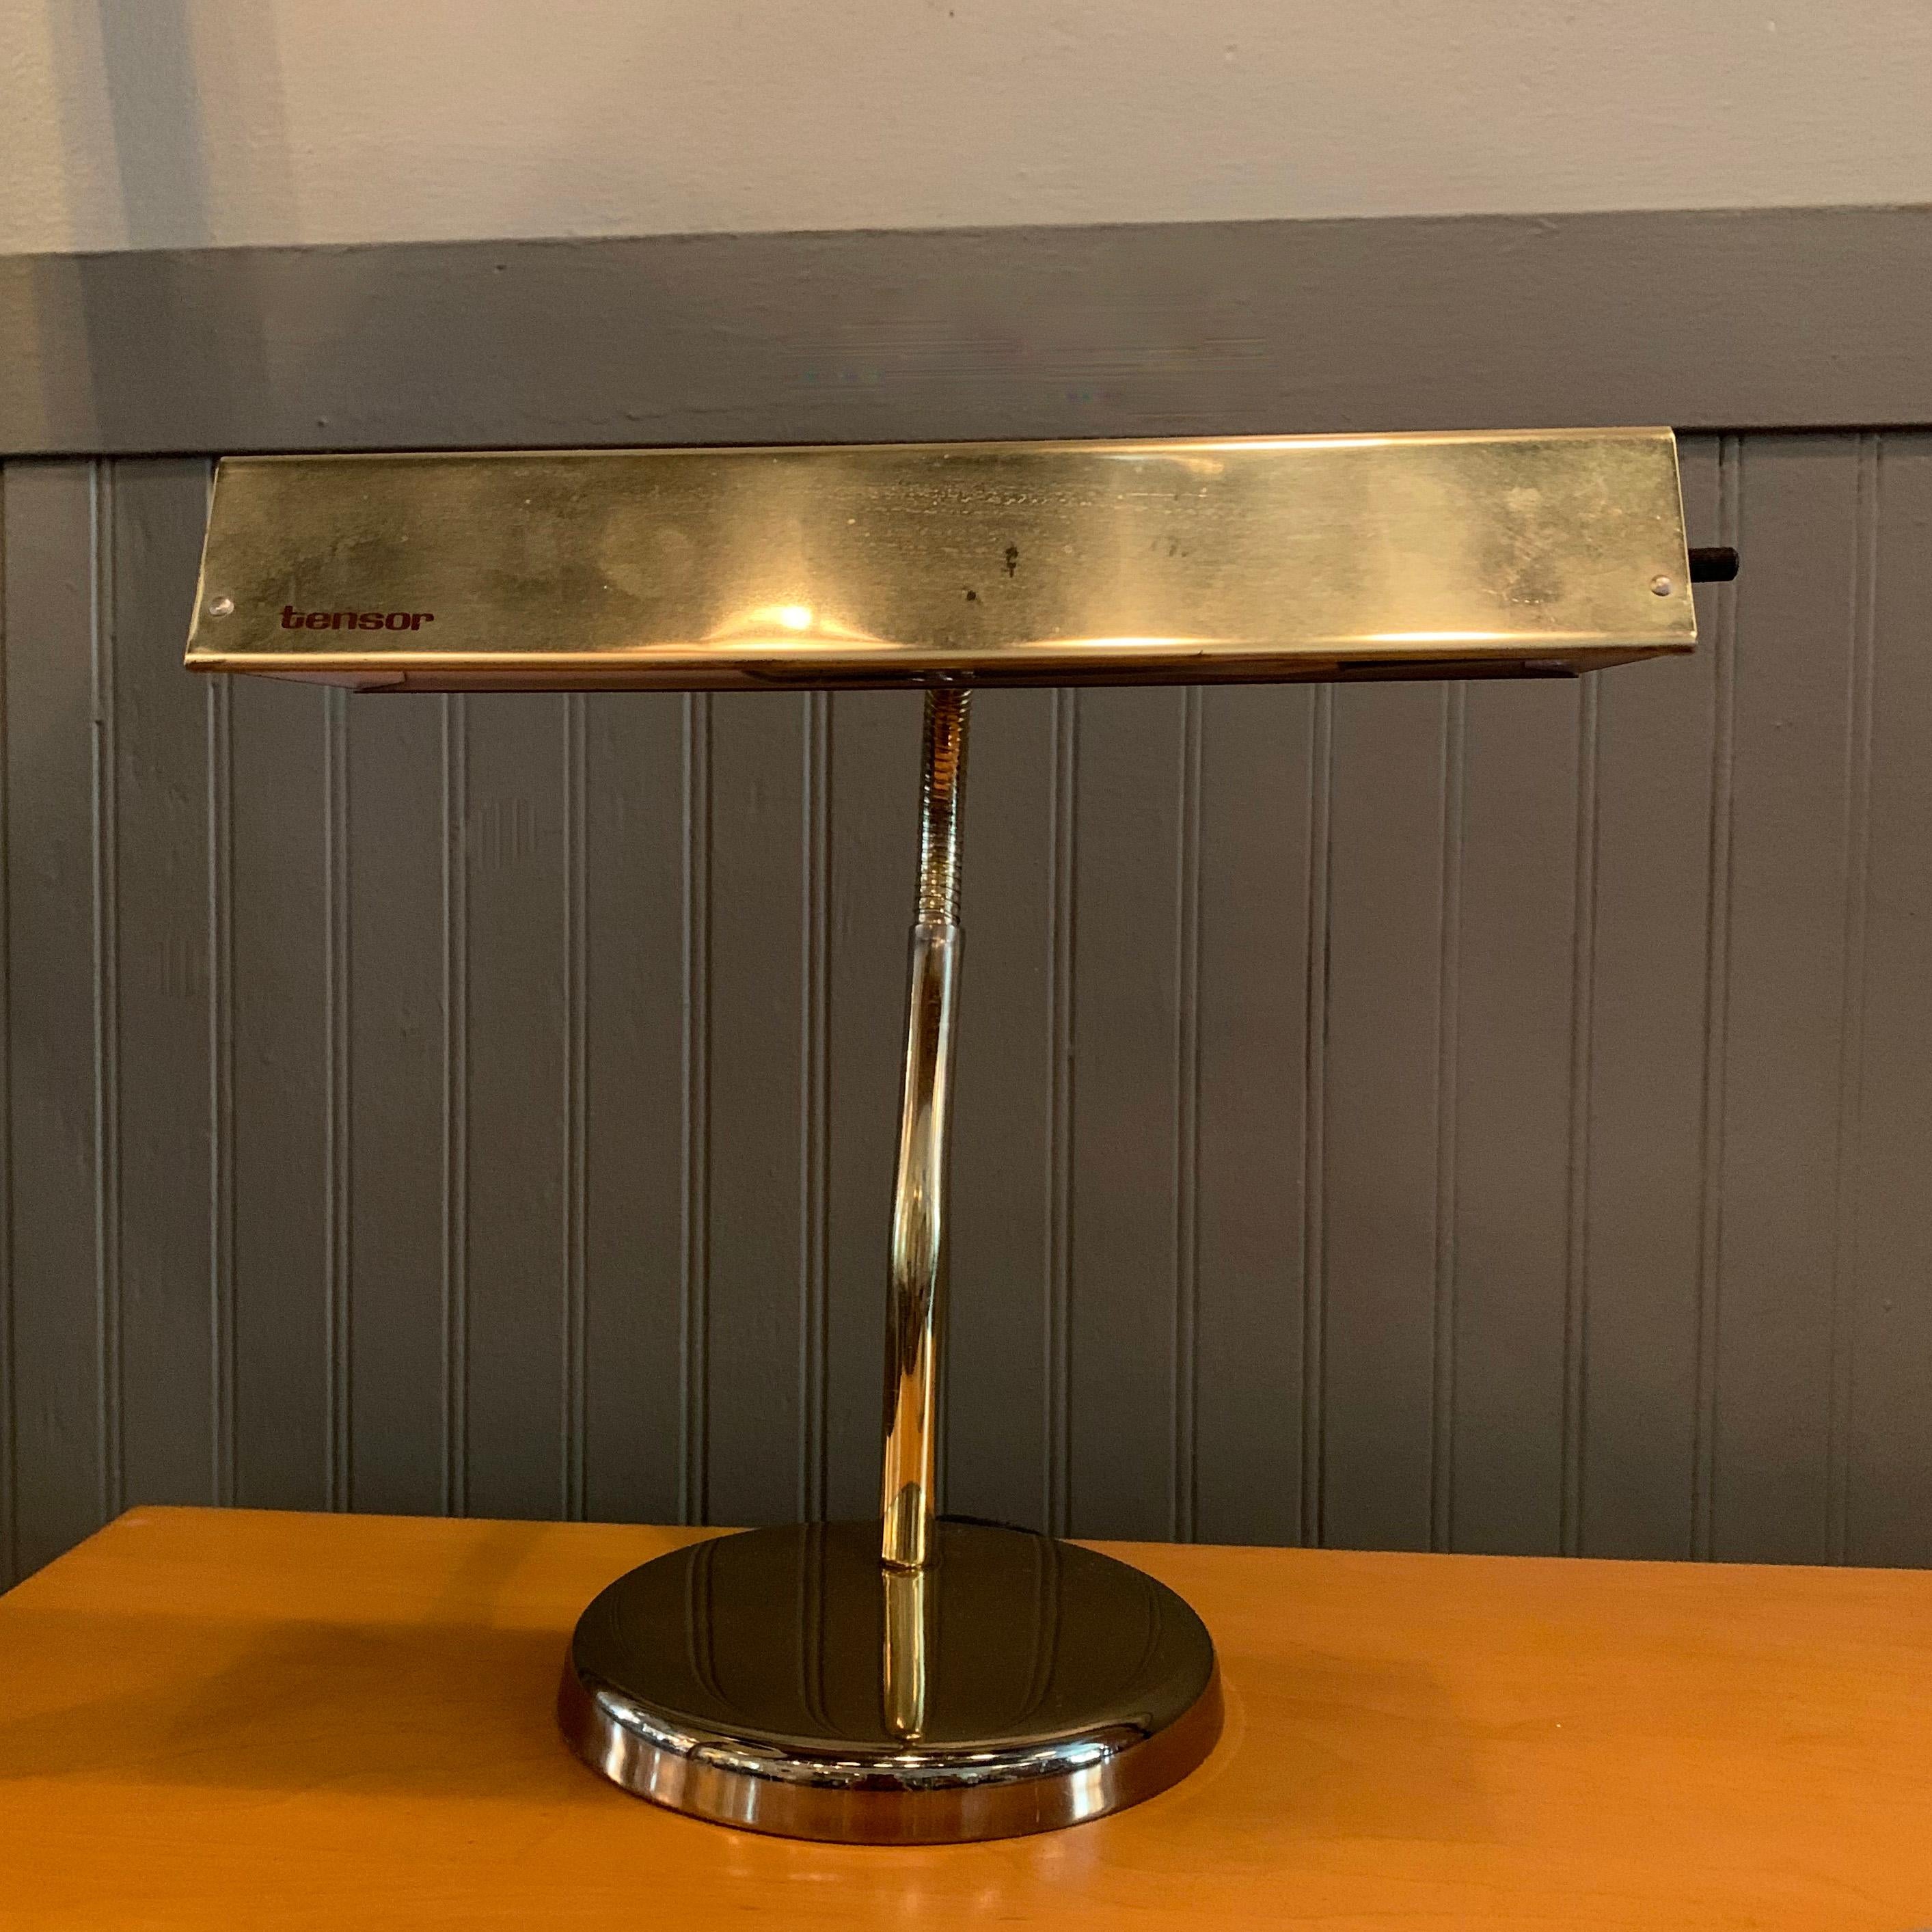 Mid-Century Modern, bass, desk lamp by Tensor features a, malleable, adjustable, gooseneck with 6 inch diameter base. The lamp accepts one medium socket bulb up to 75 watts.